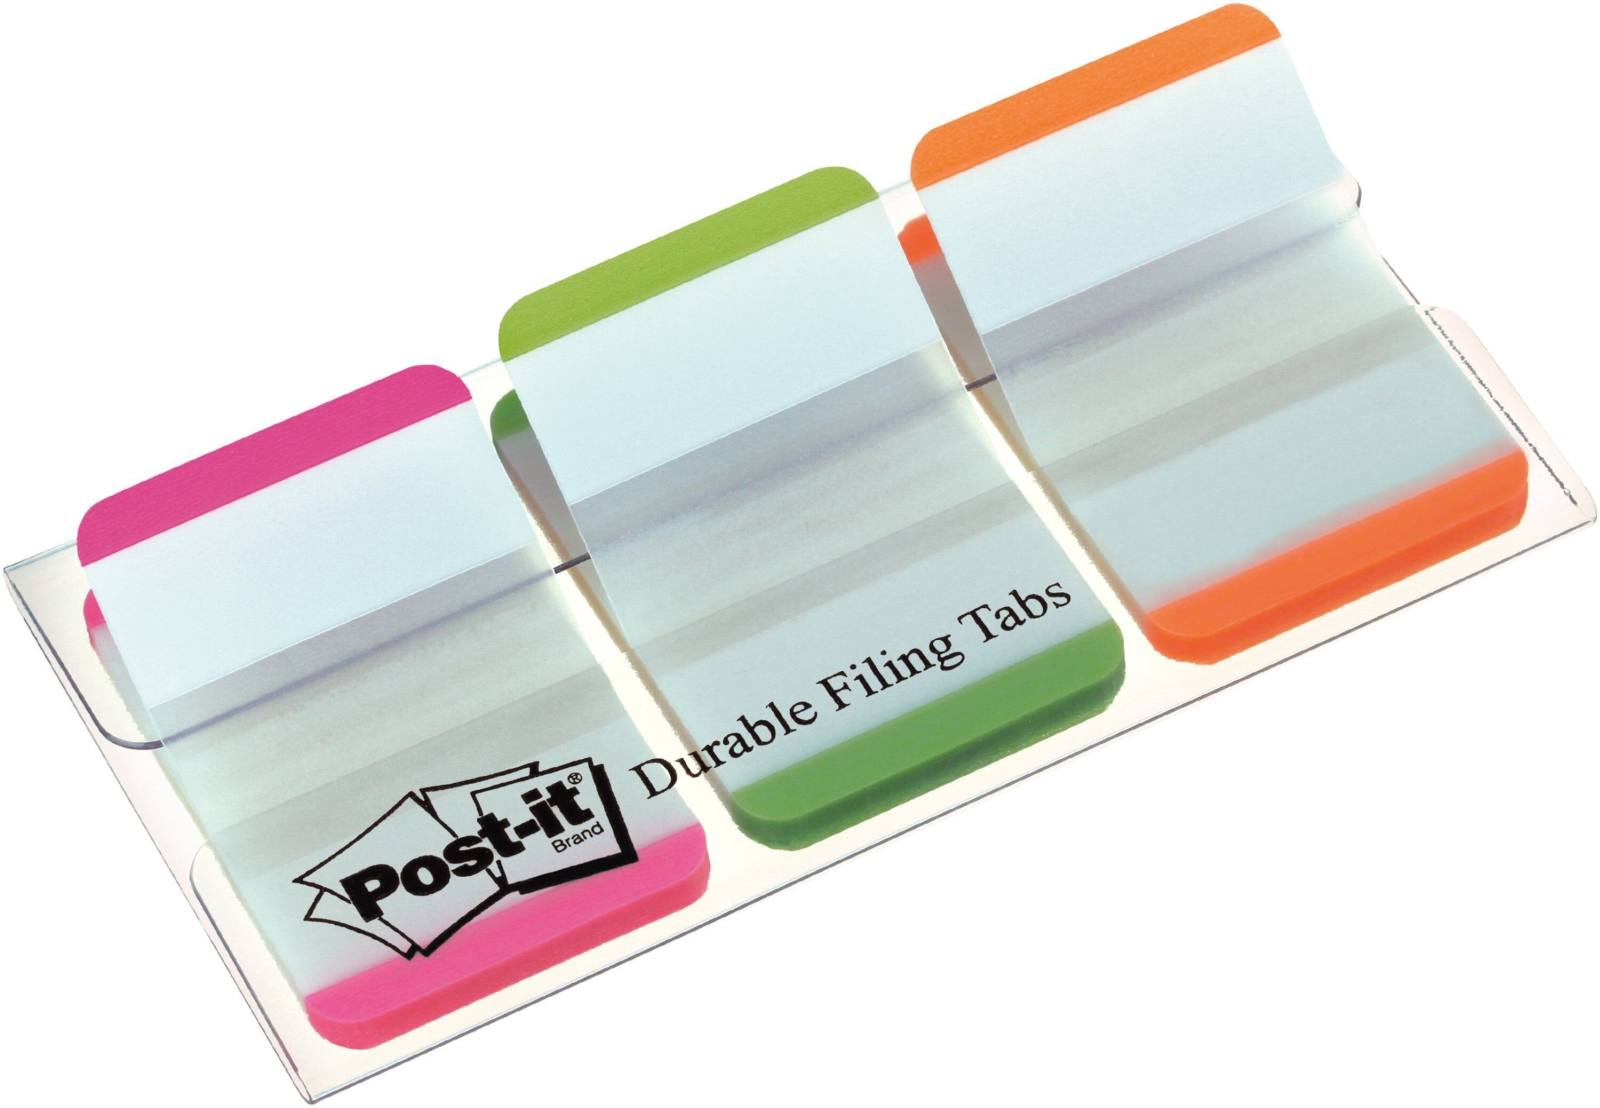 3M Post-it Index Strong 686L-PGO, 25.4 mm x 38 mm, green, orange, pink, 3 x 22 adhesive strips in a case